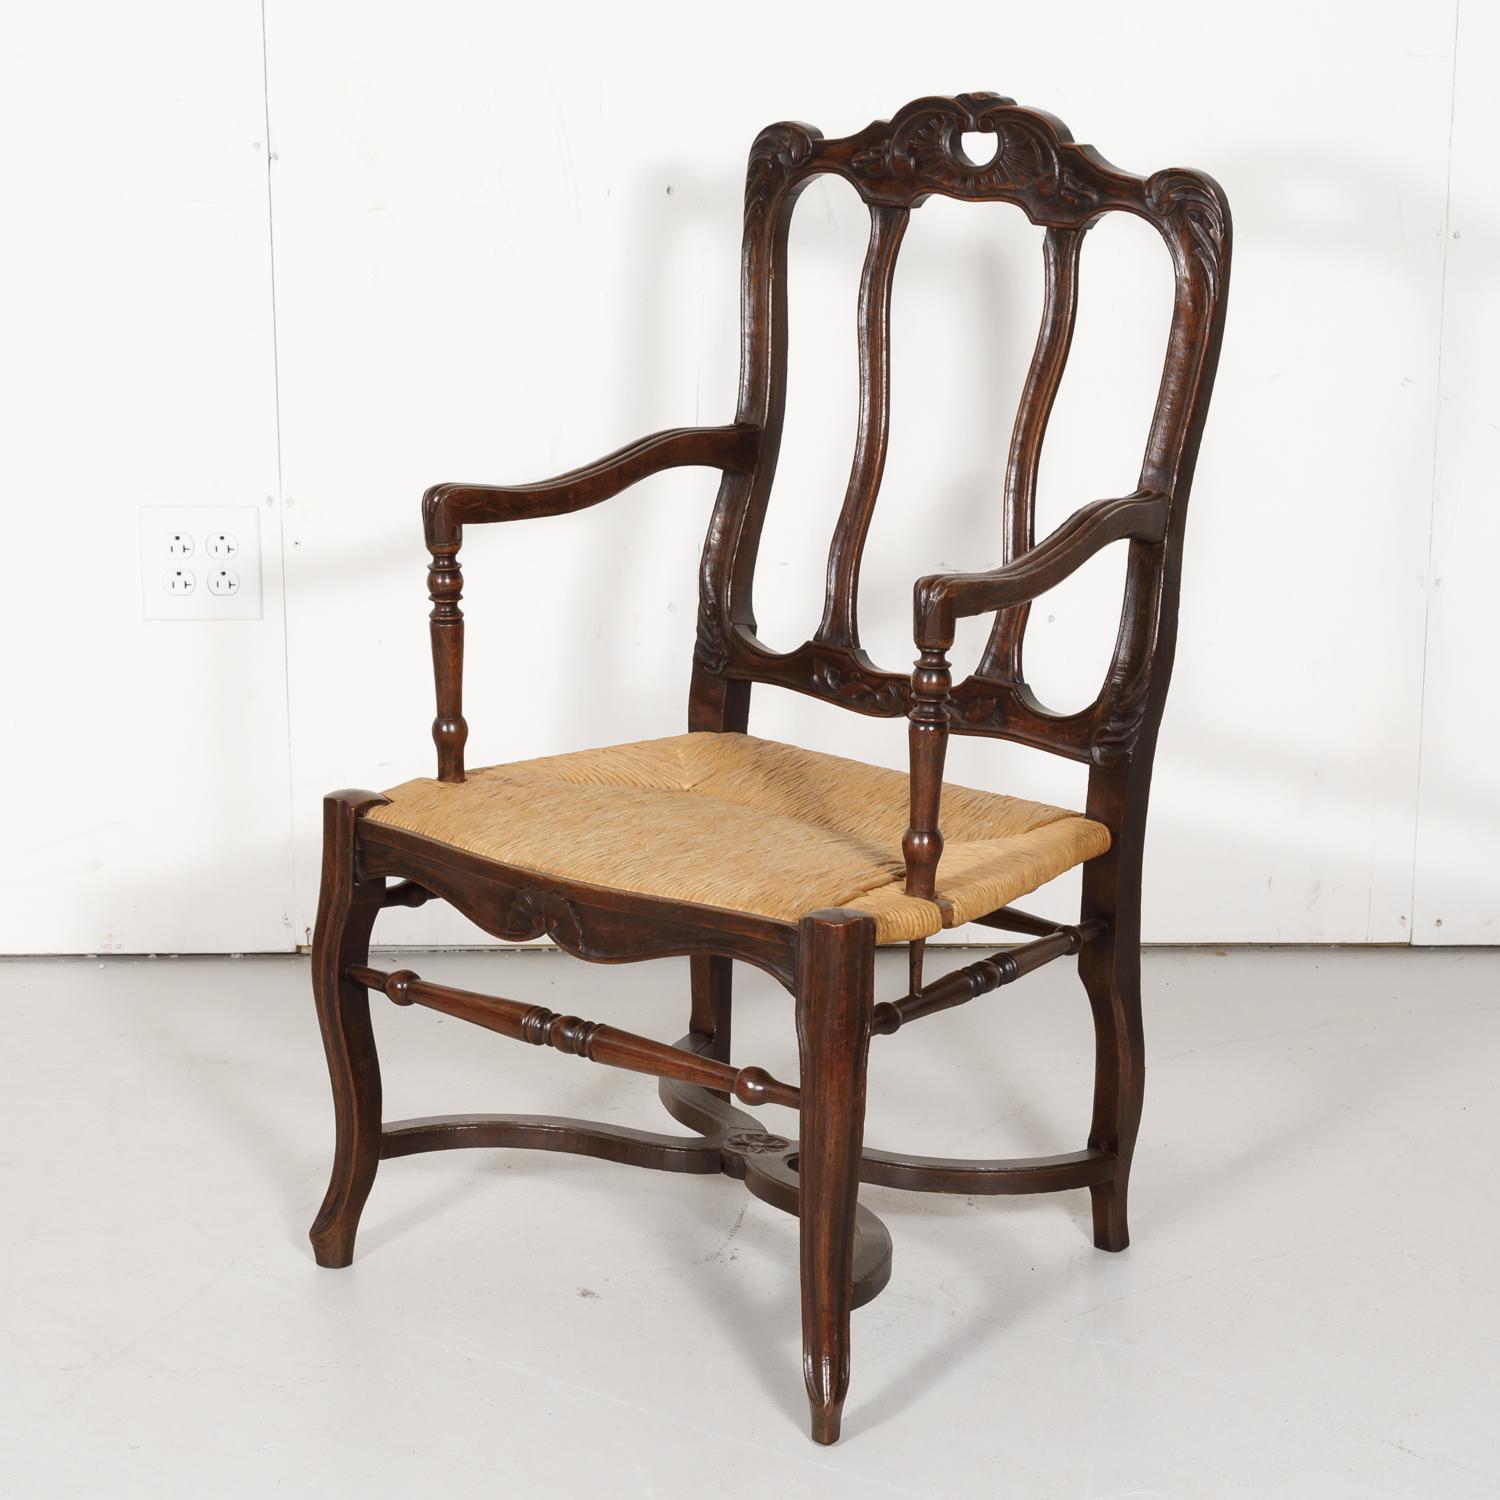 A 19th century Country French hand carved oak rush seat armchair, circa 1880s. This provincial armchair features carved floral motifs on the crest rail and apron with curved armrests. Raised on cabriole legs joined by carved X-stretcher. A wonderful